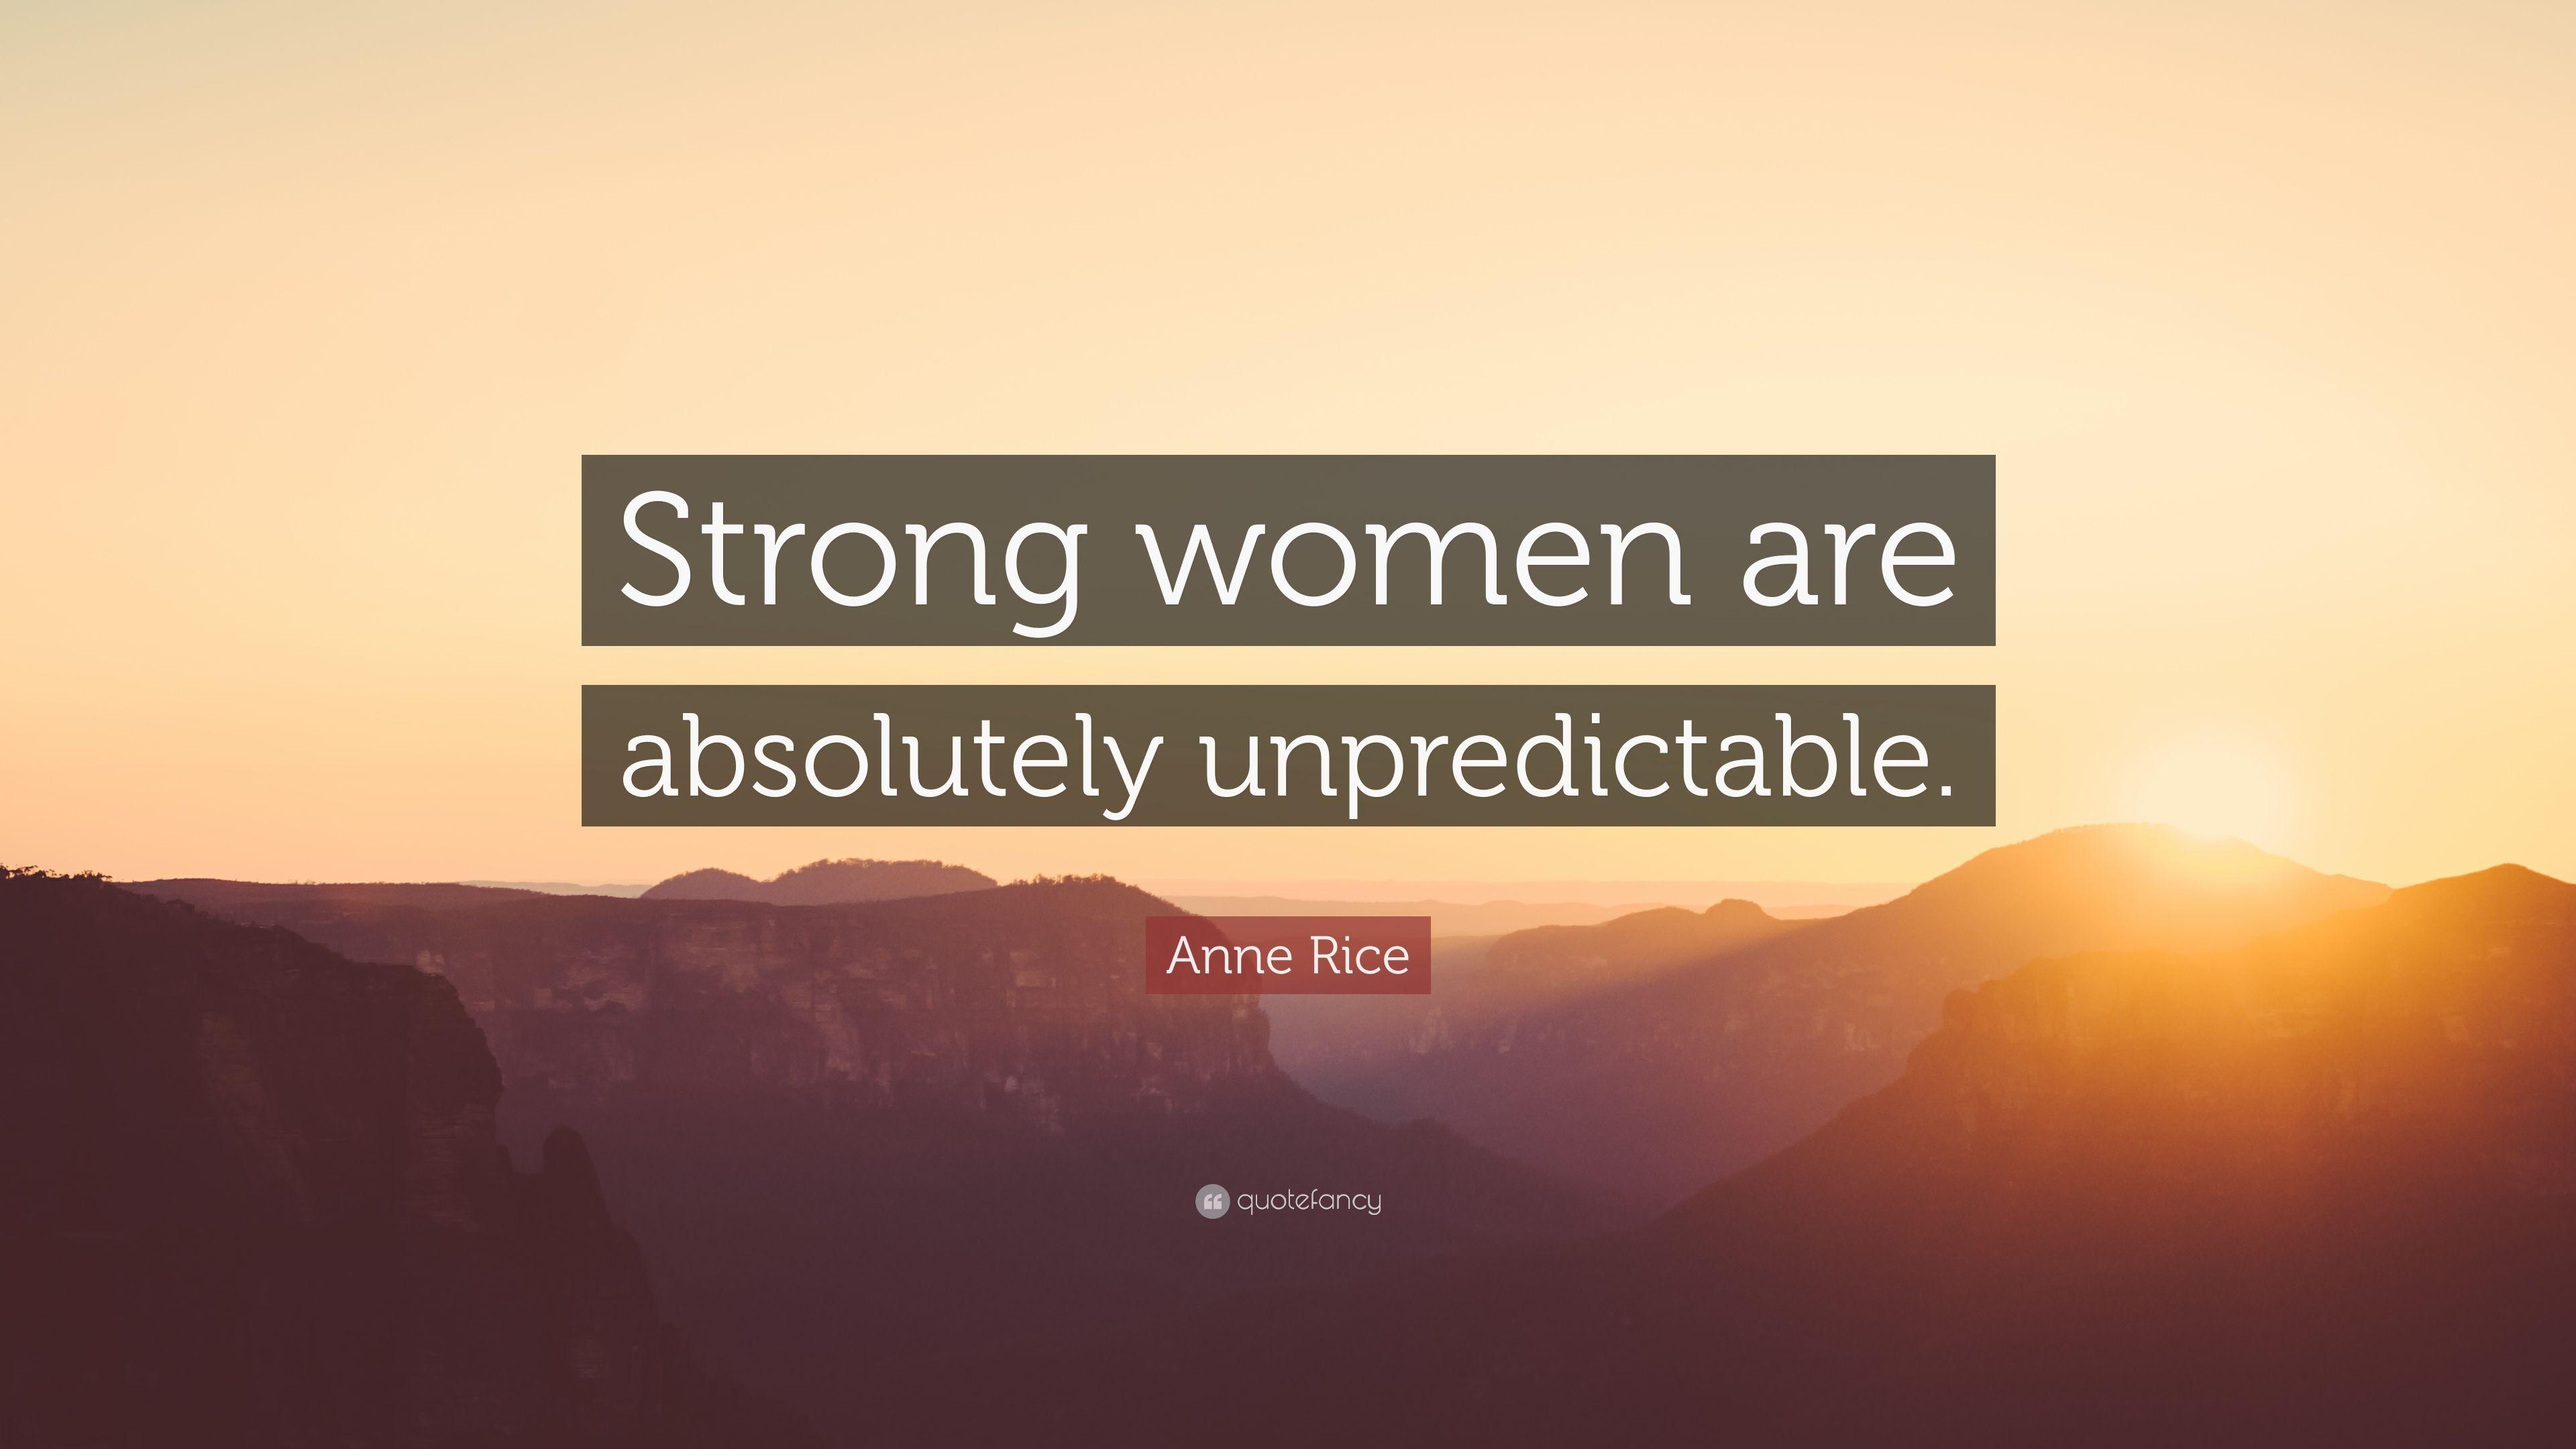 Anne Rice Quote: “Strong women are absolutely unpredictable.” 12